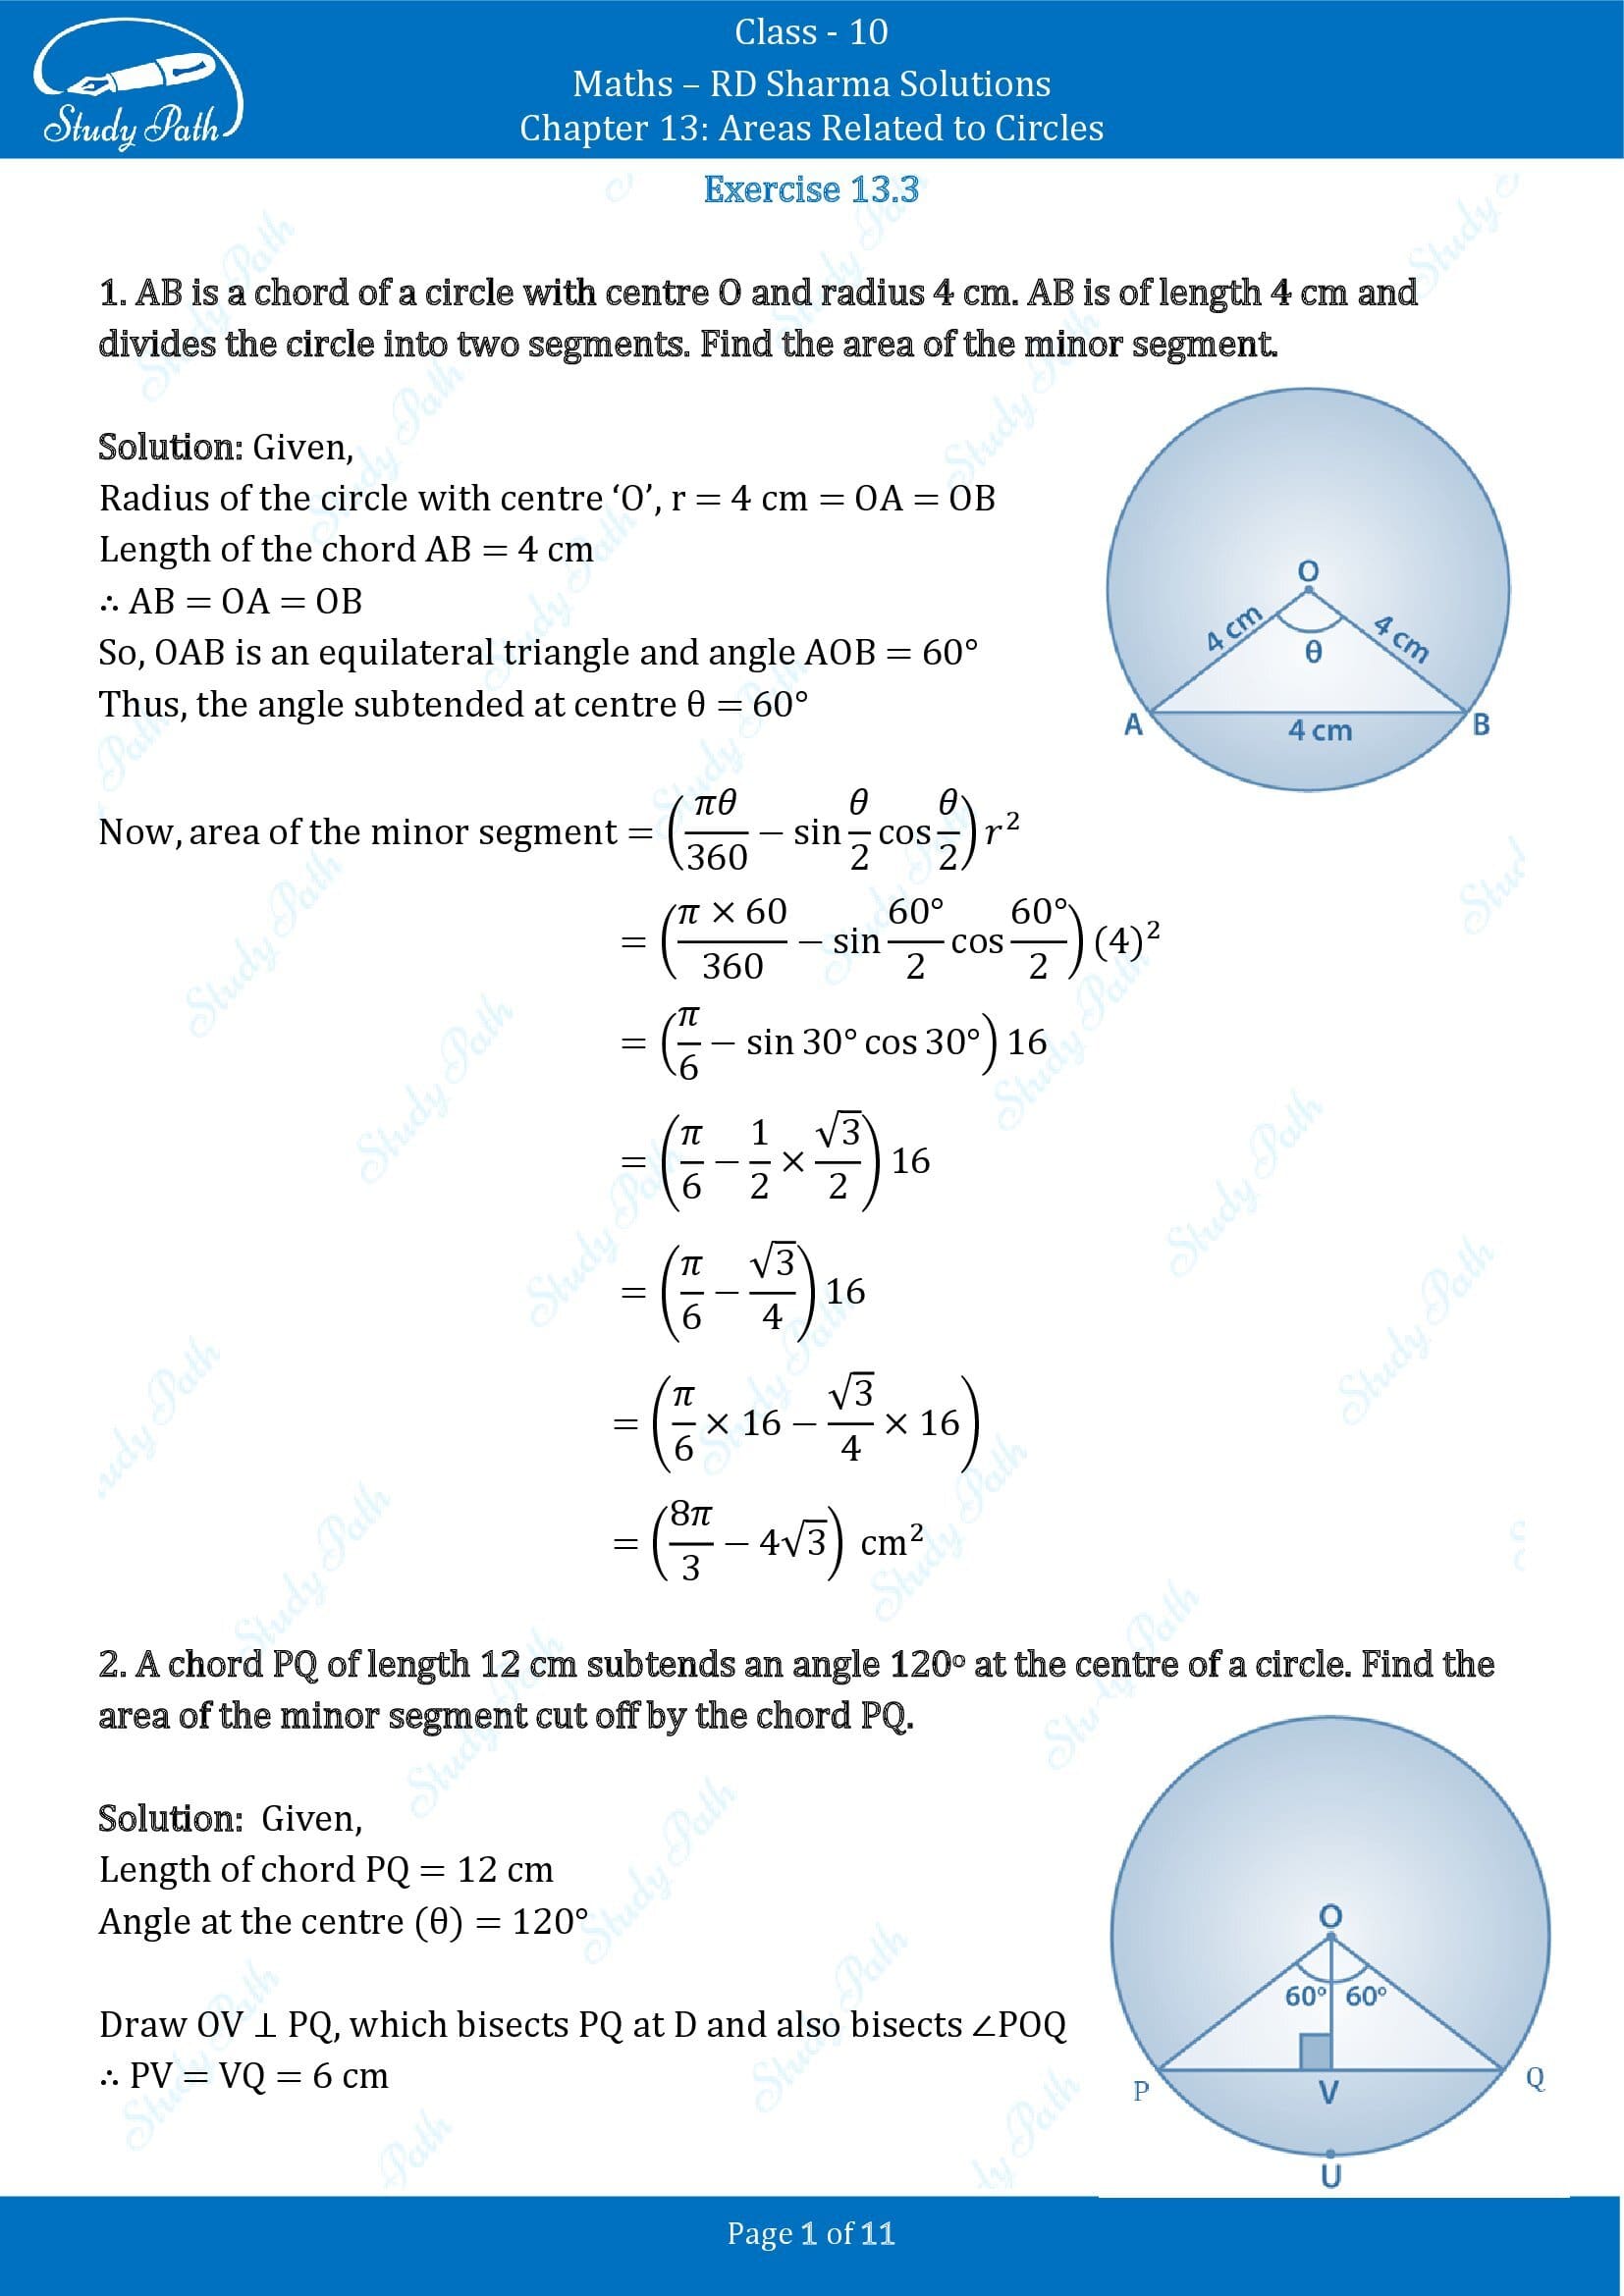 RD Sharma Solutions Class 10 Chapter 13 Areas Related to Circles Exercise 13.3 00001